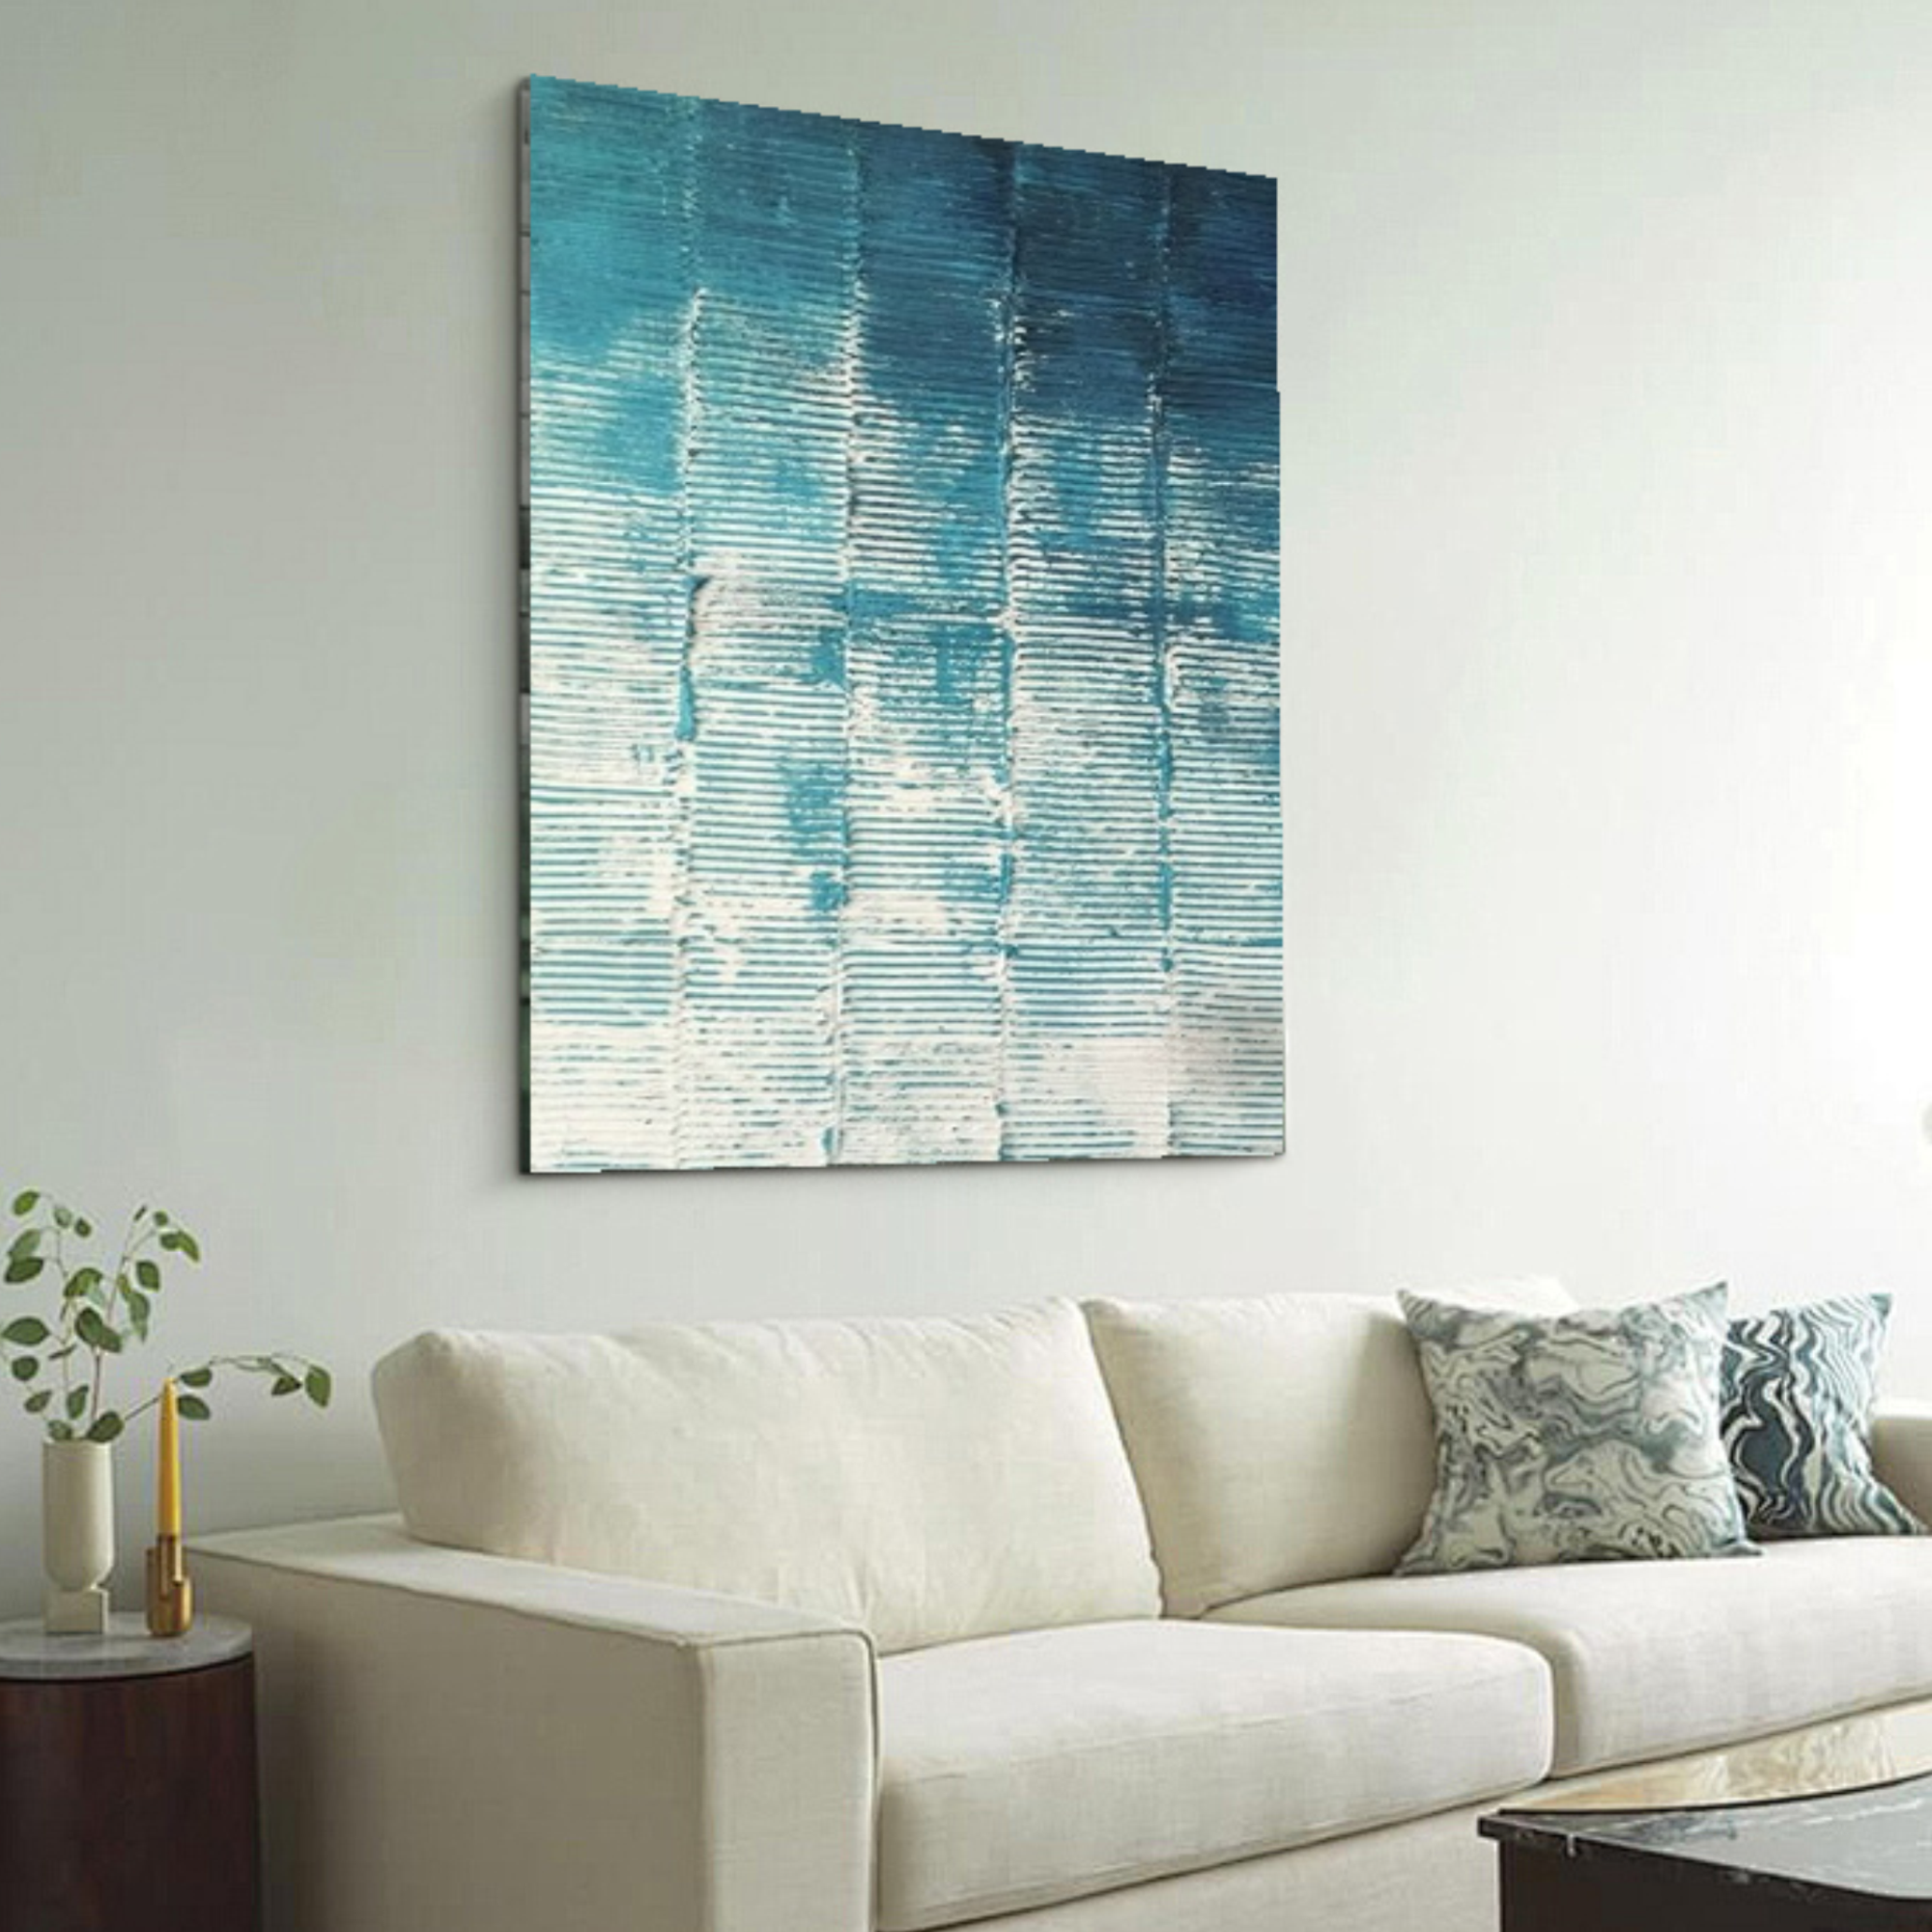 Abstract Textured Painting "Azure"